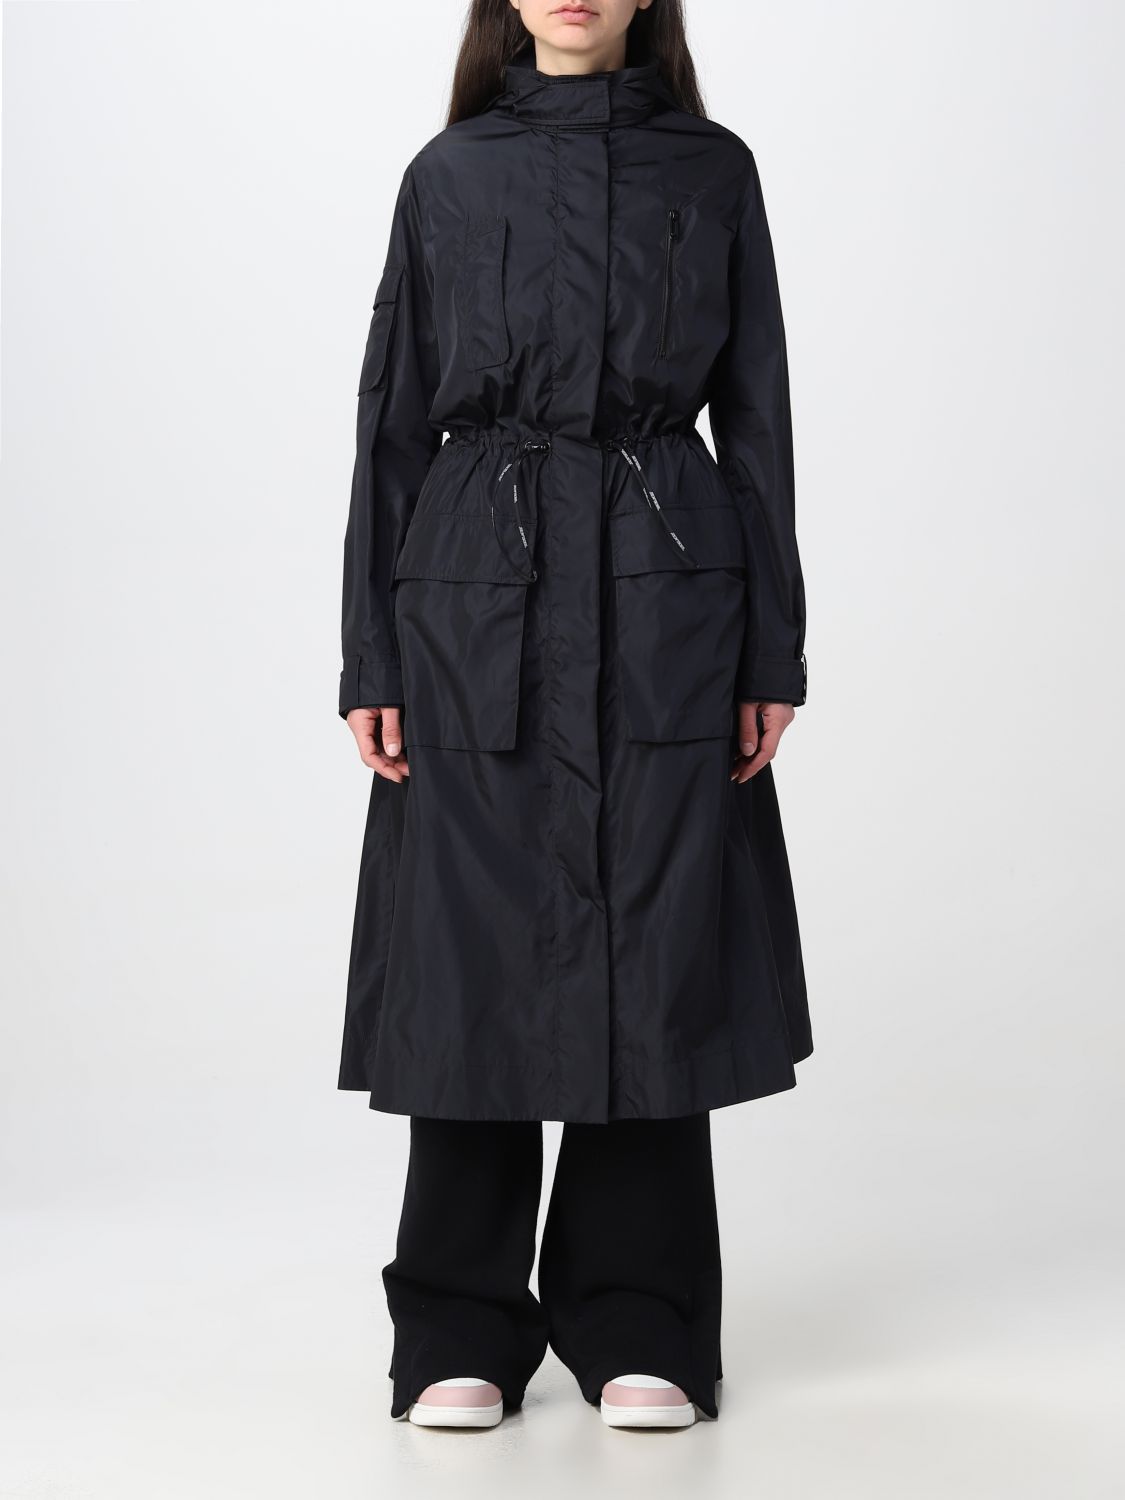 OFF-WHITE: trench coat for woman - Black | Off-White trench coat ...